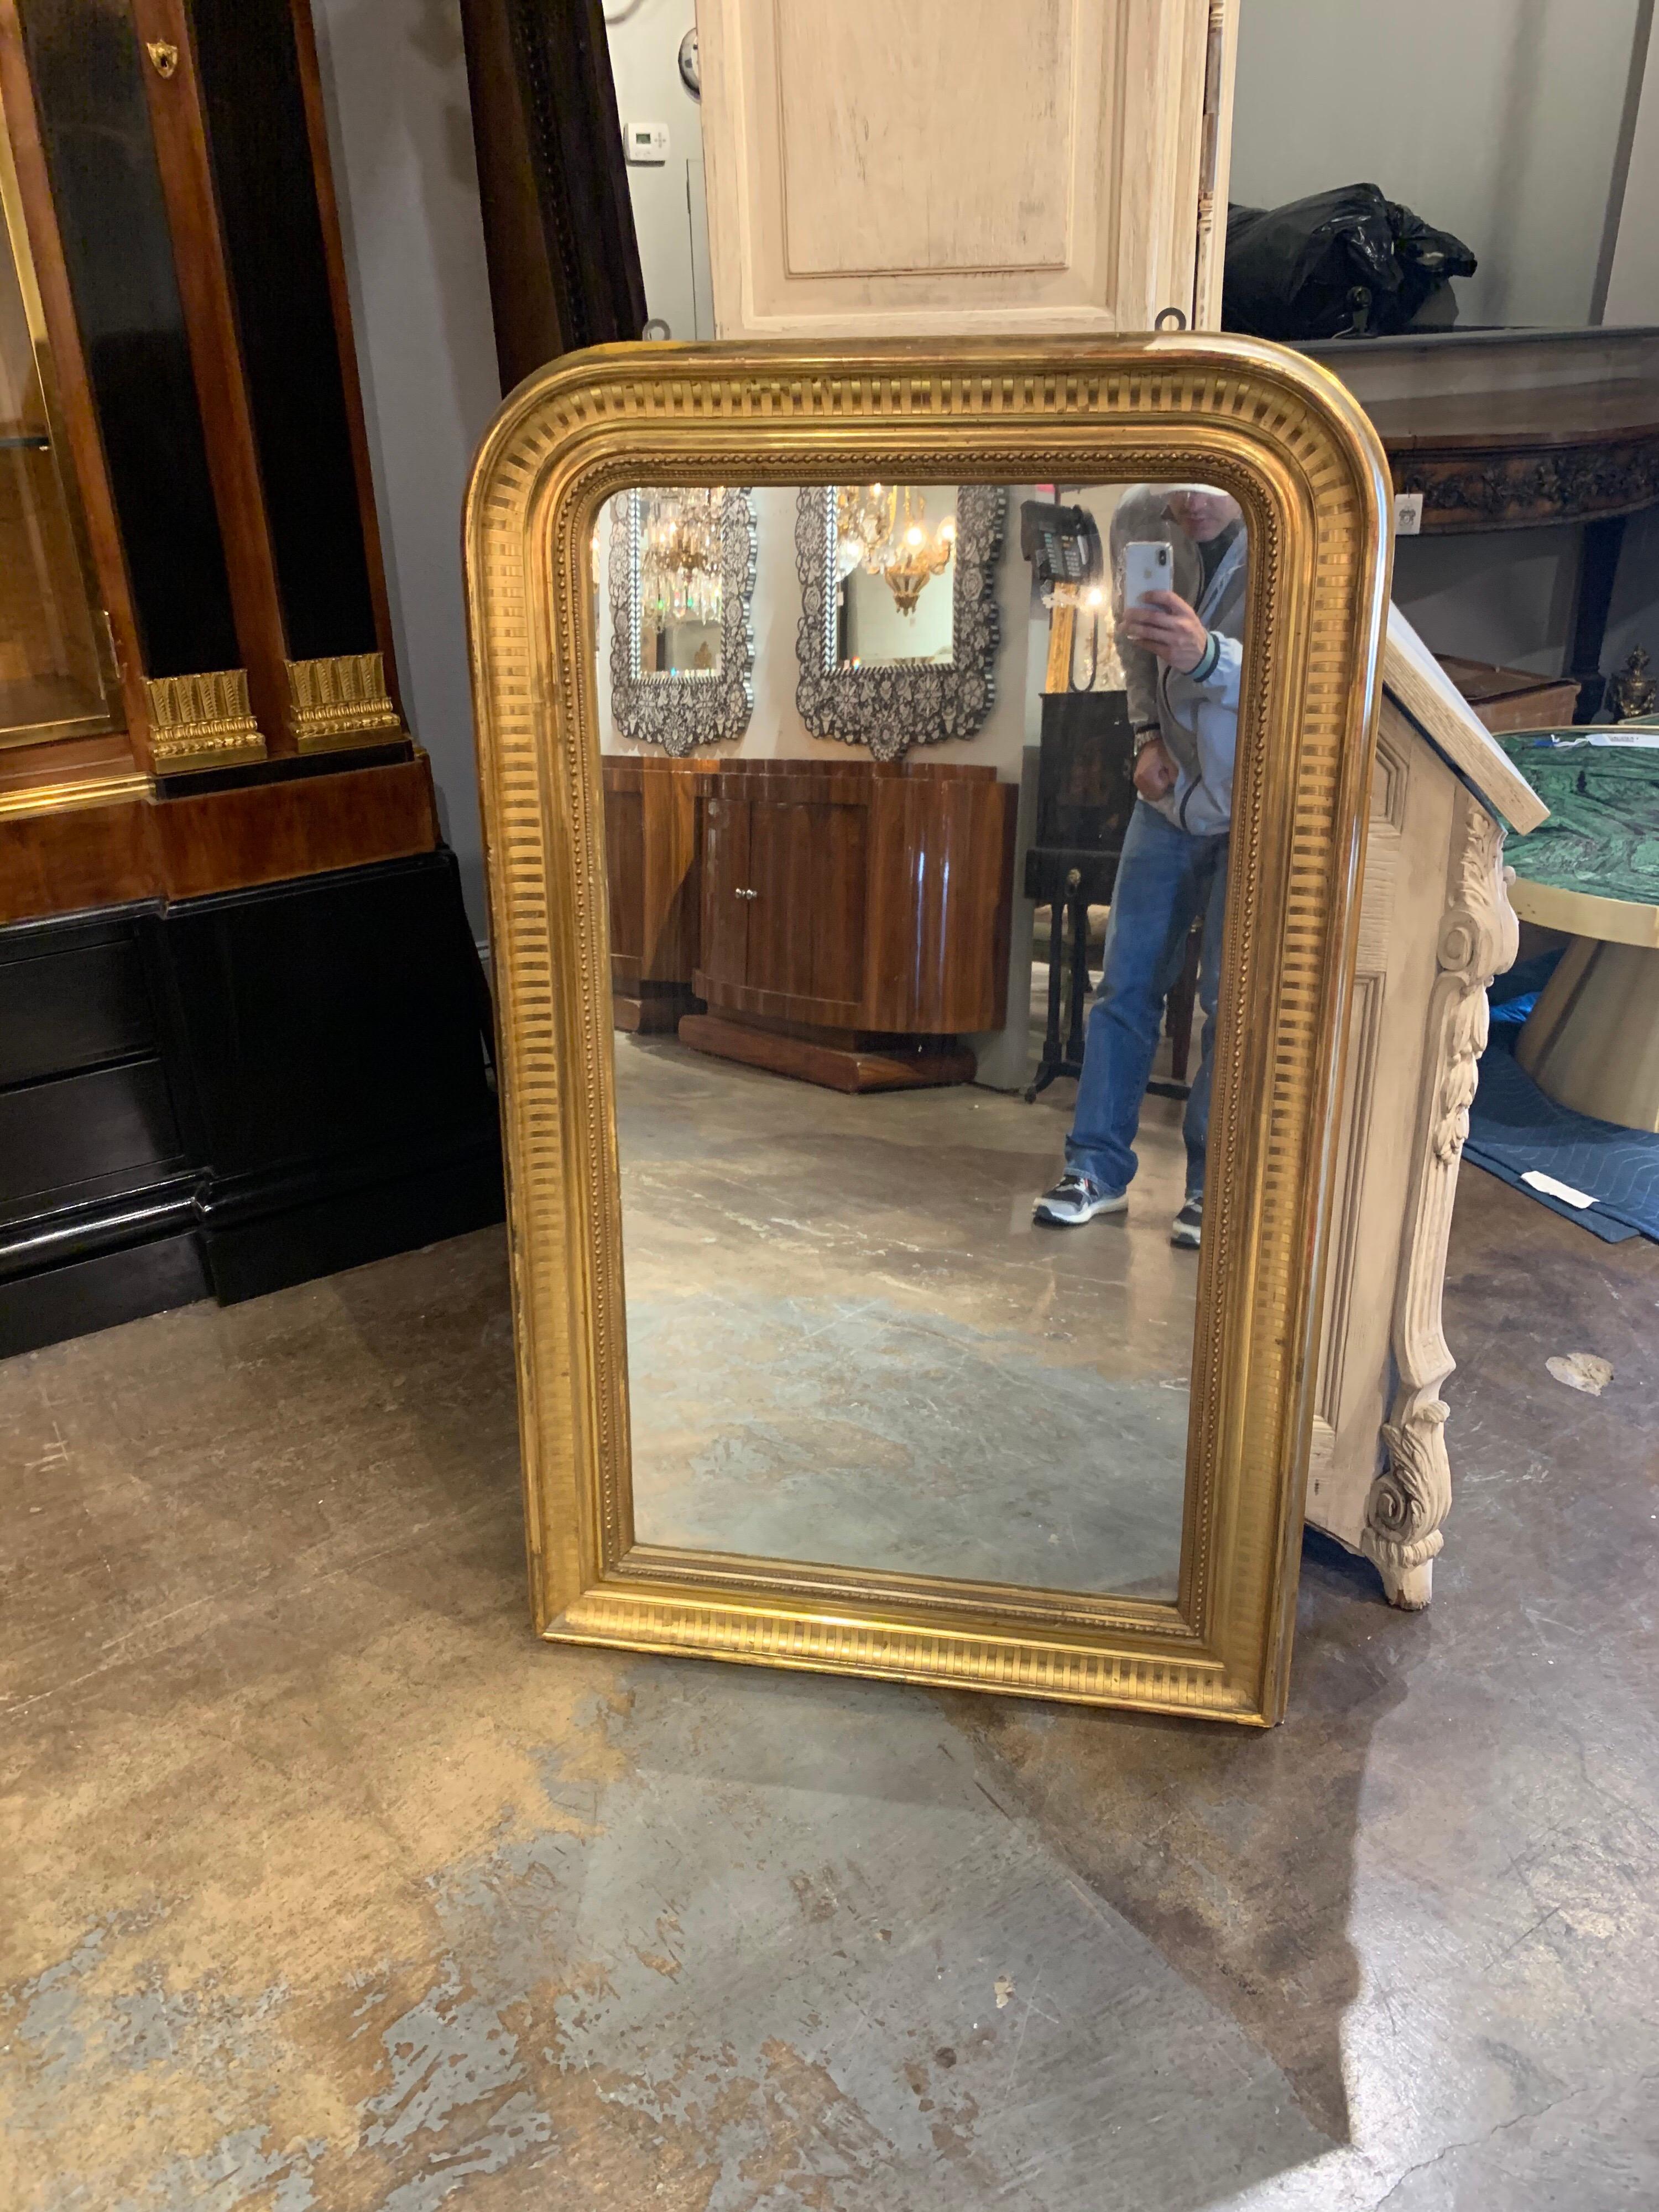 Beautiful Louis Phillipe mirror with gold gilt finish. The piece has a line pattern and beaded detail. Very elegant!